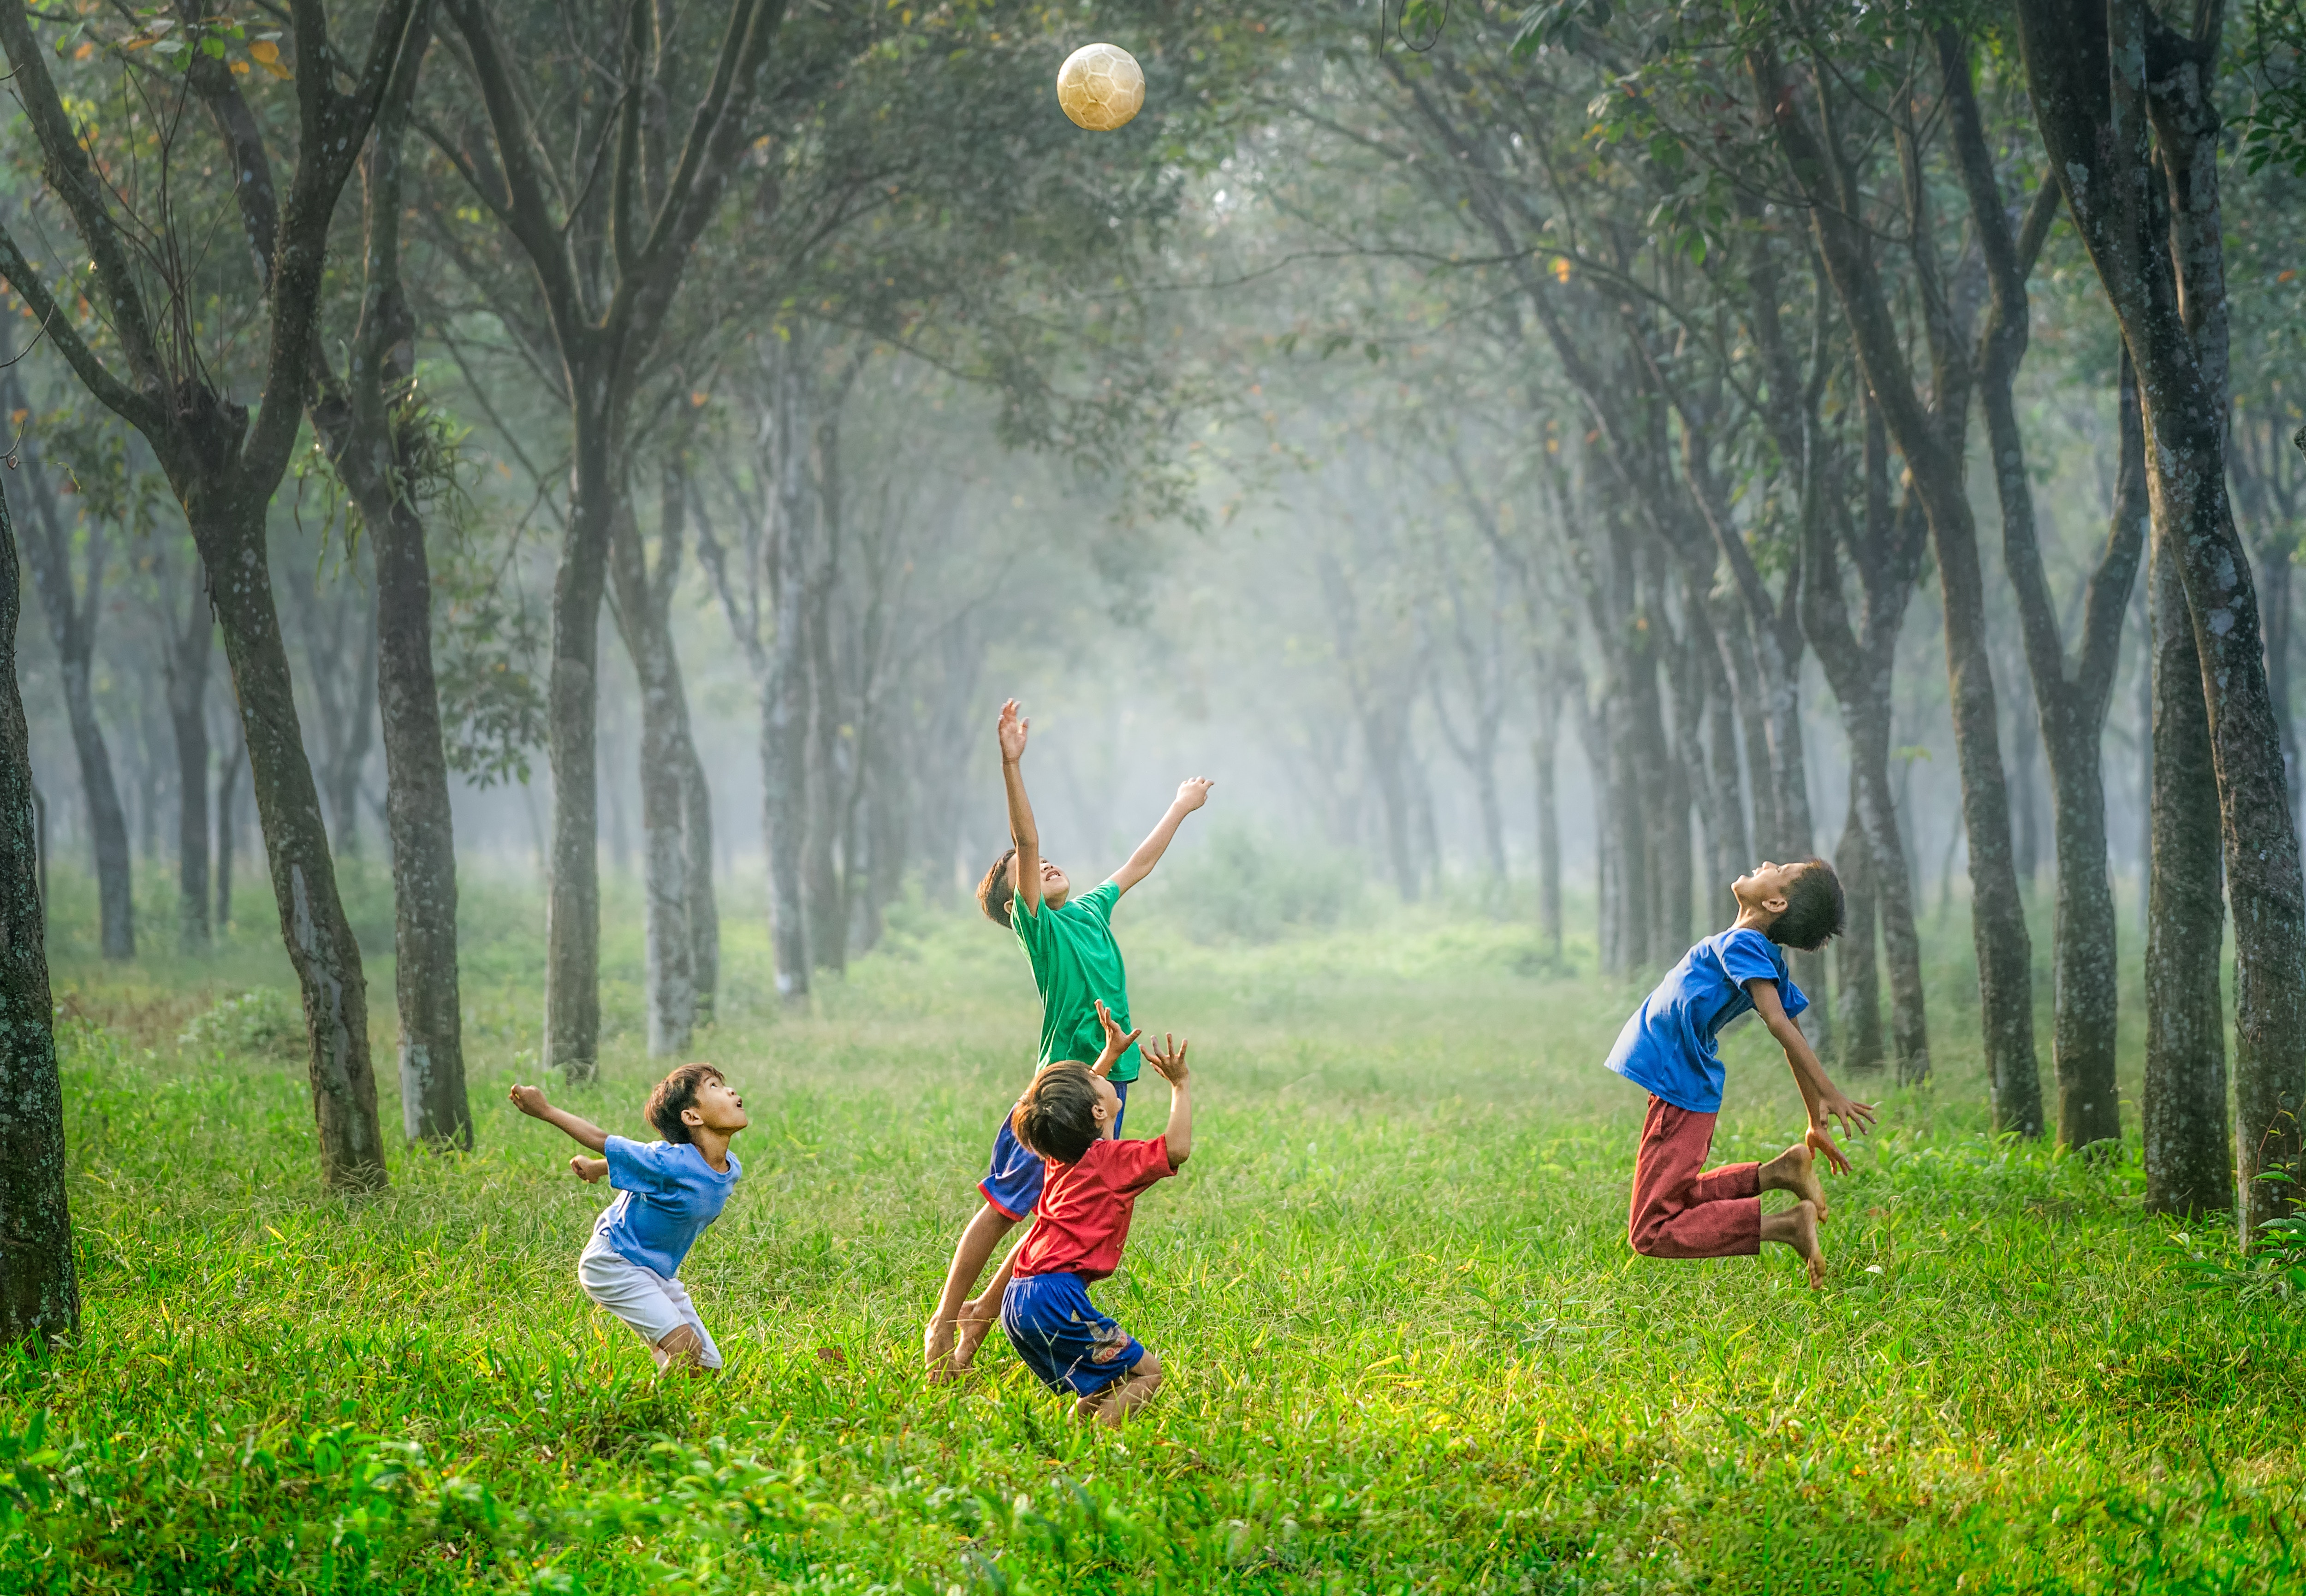 Children playing with ball